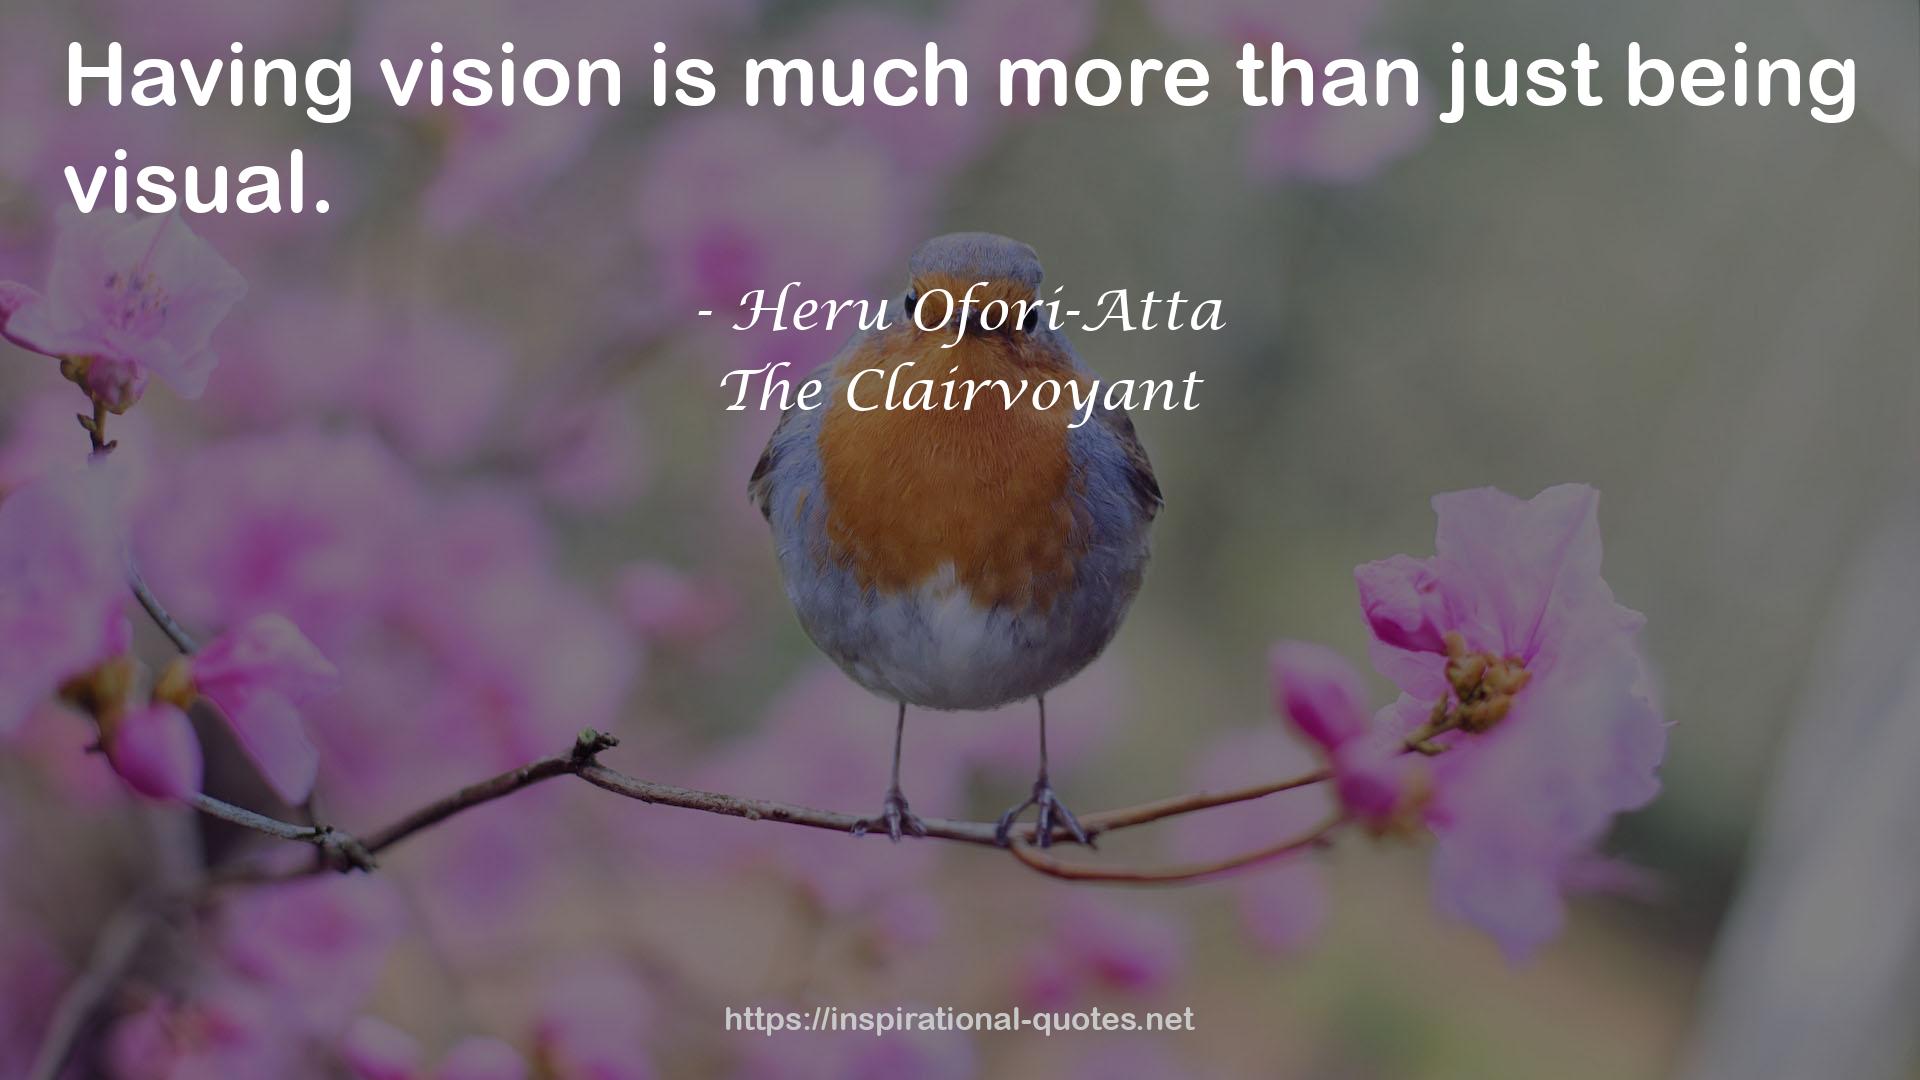 The Clairvoyant QUOTES